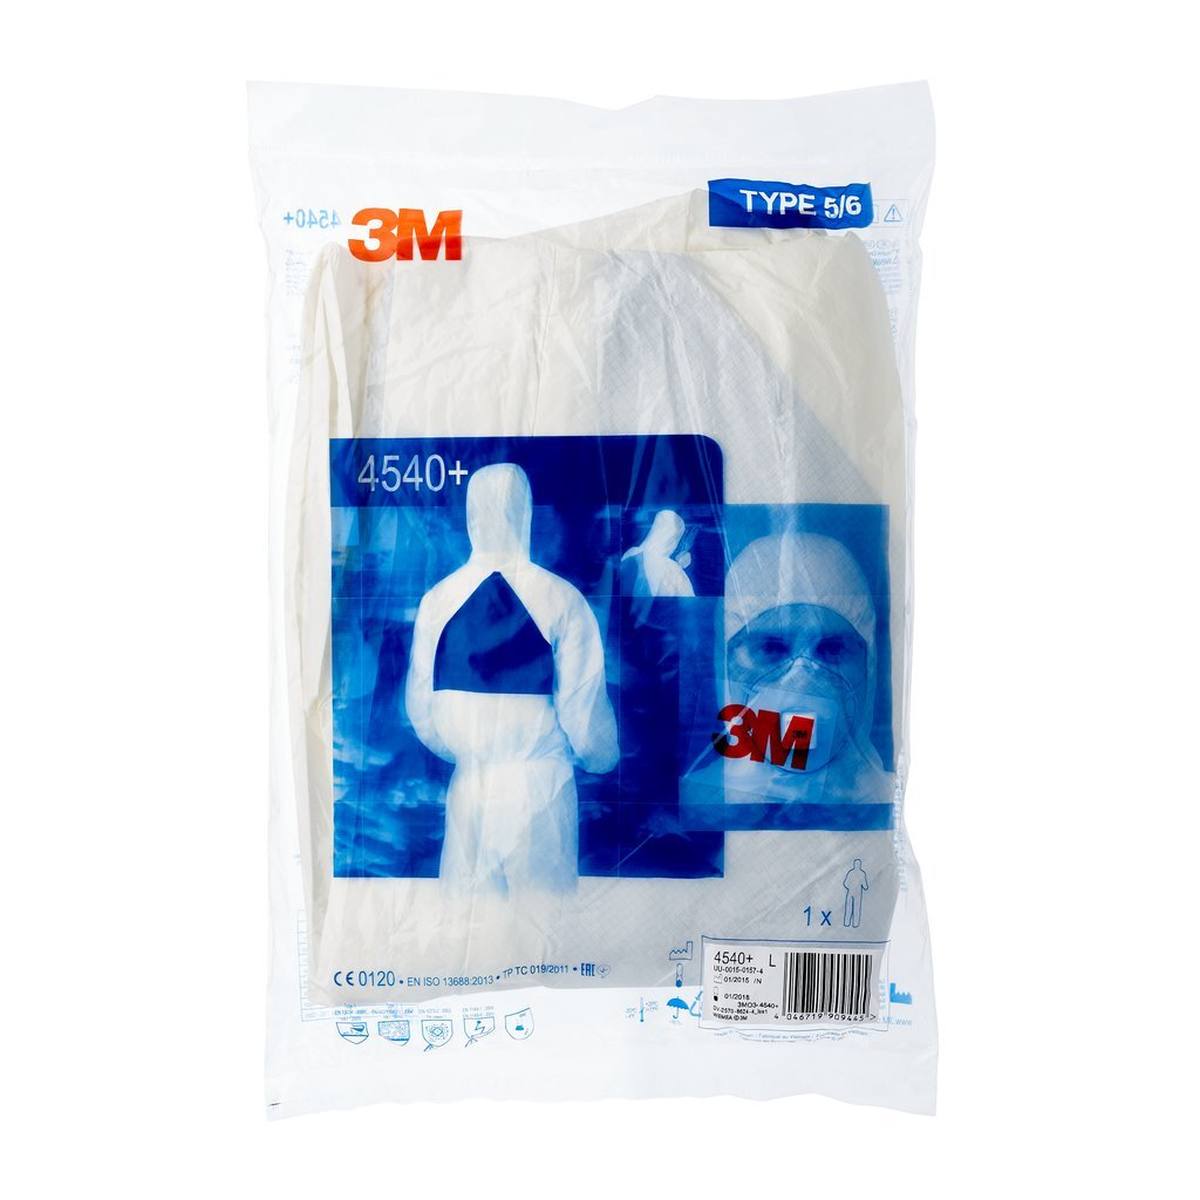 3M 4540+ coverall, white+blue, type 5/6, size 4XL, robust, lint-free, reinforced seams, SMMMS material, breathable, detachable zipper, knitted cuffs